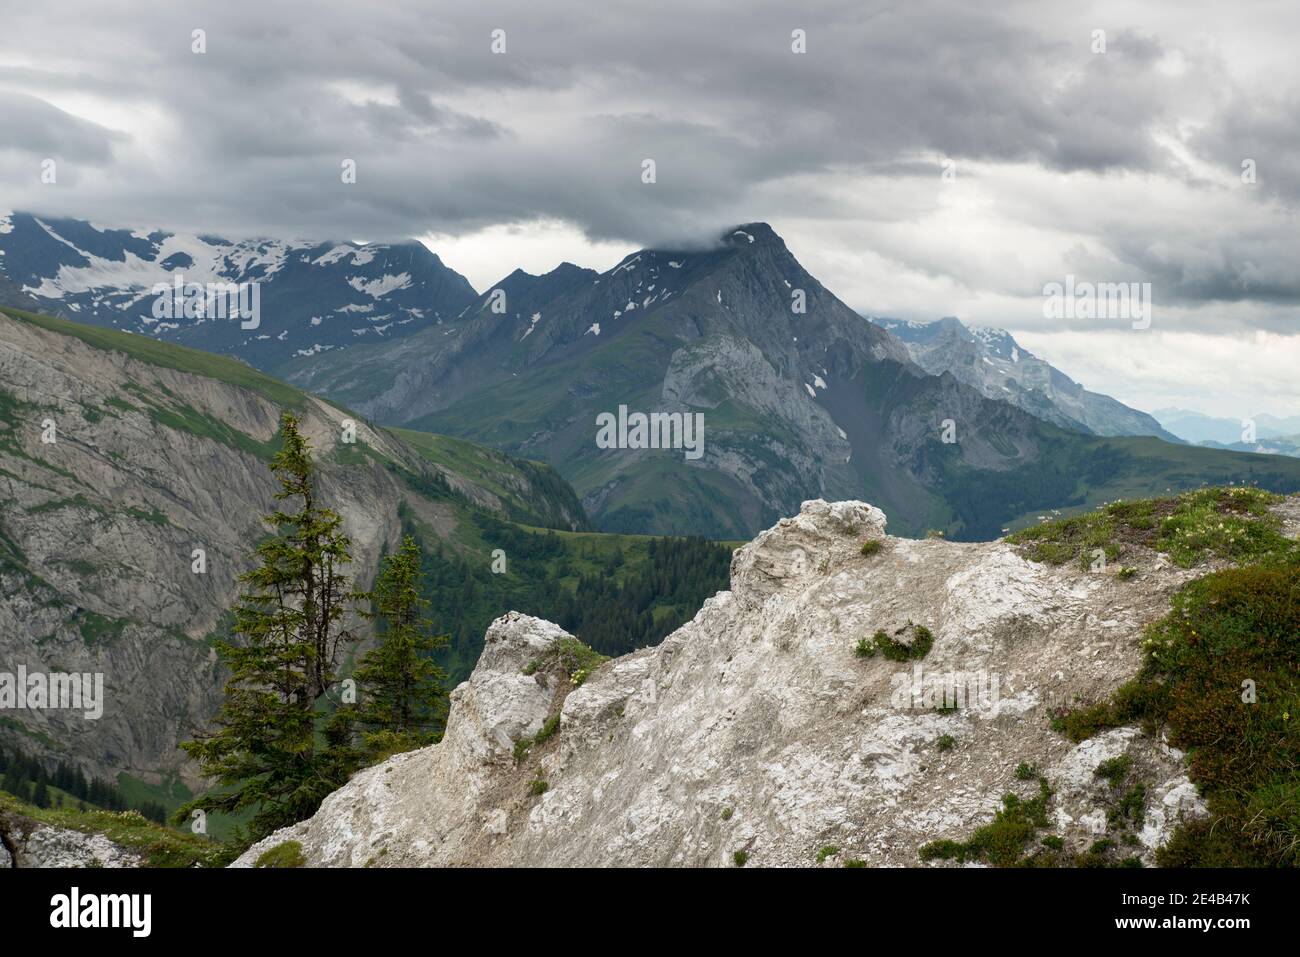 white rocks with fir trees, in the background foothills of the Alps with an overcast sky Stock Photo